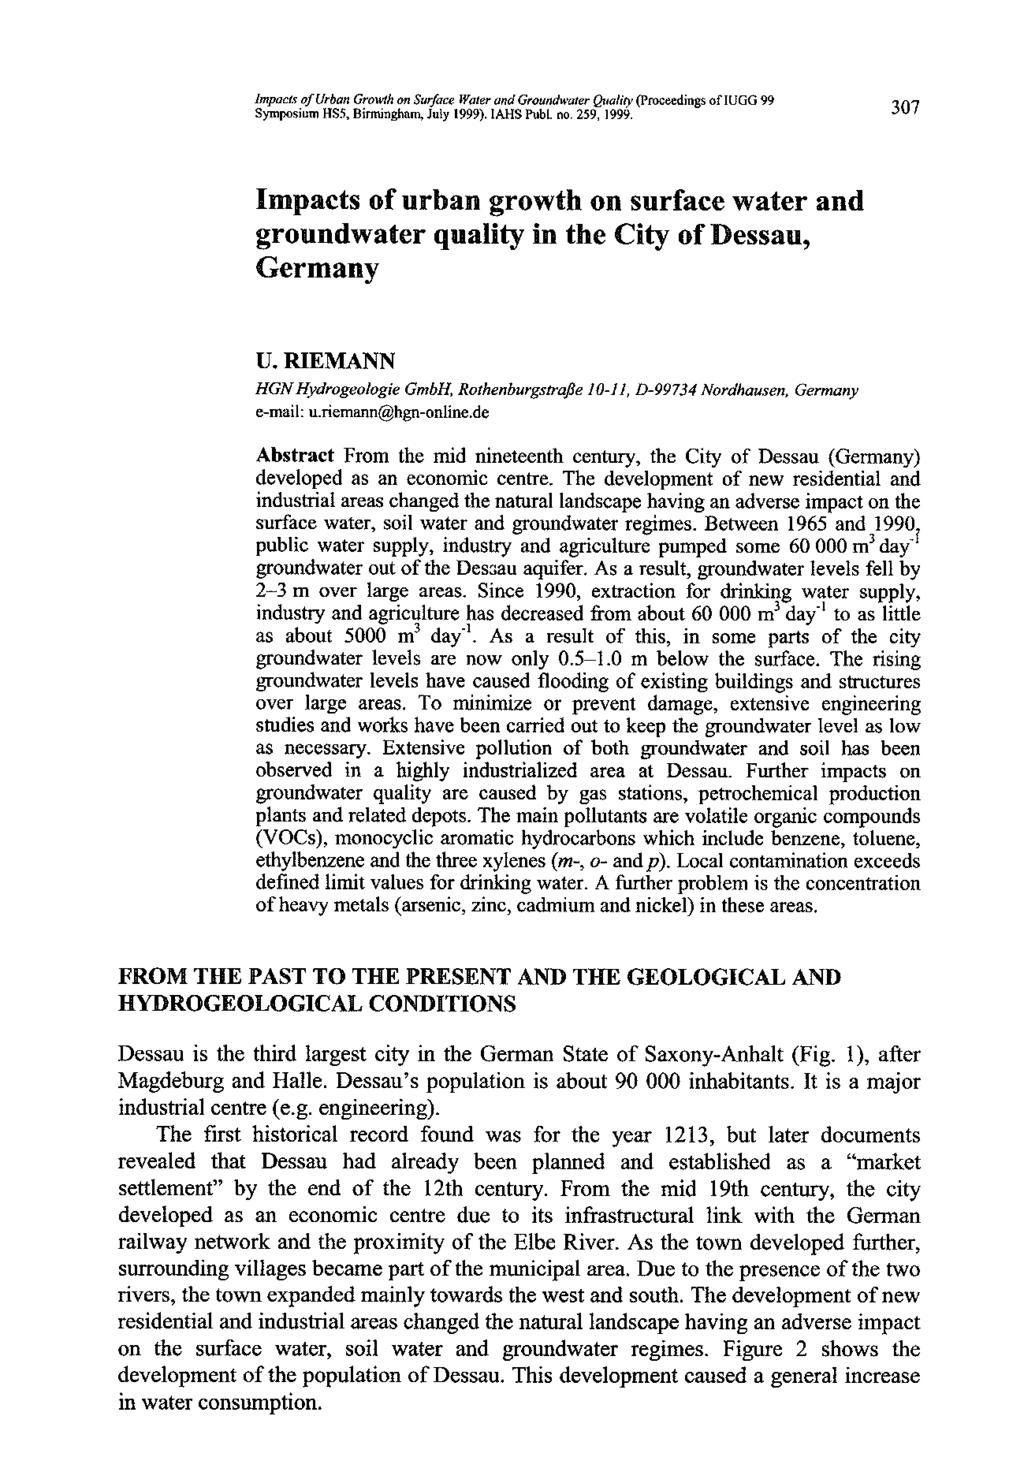 Impacts of Urban Growth on Surface Water and Groundwater Quality (Proceedings of IUGG 99 Symposium HSS, Birmingham, July 1999). IAHS Publ. no. 259, 1999.